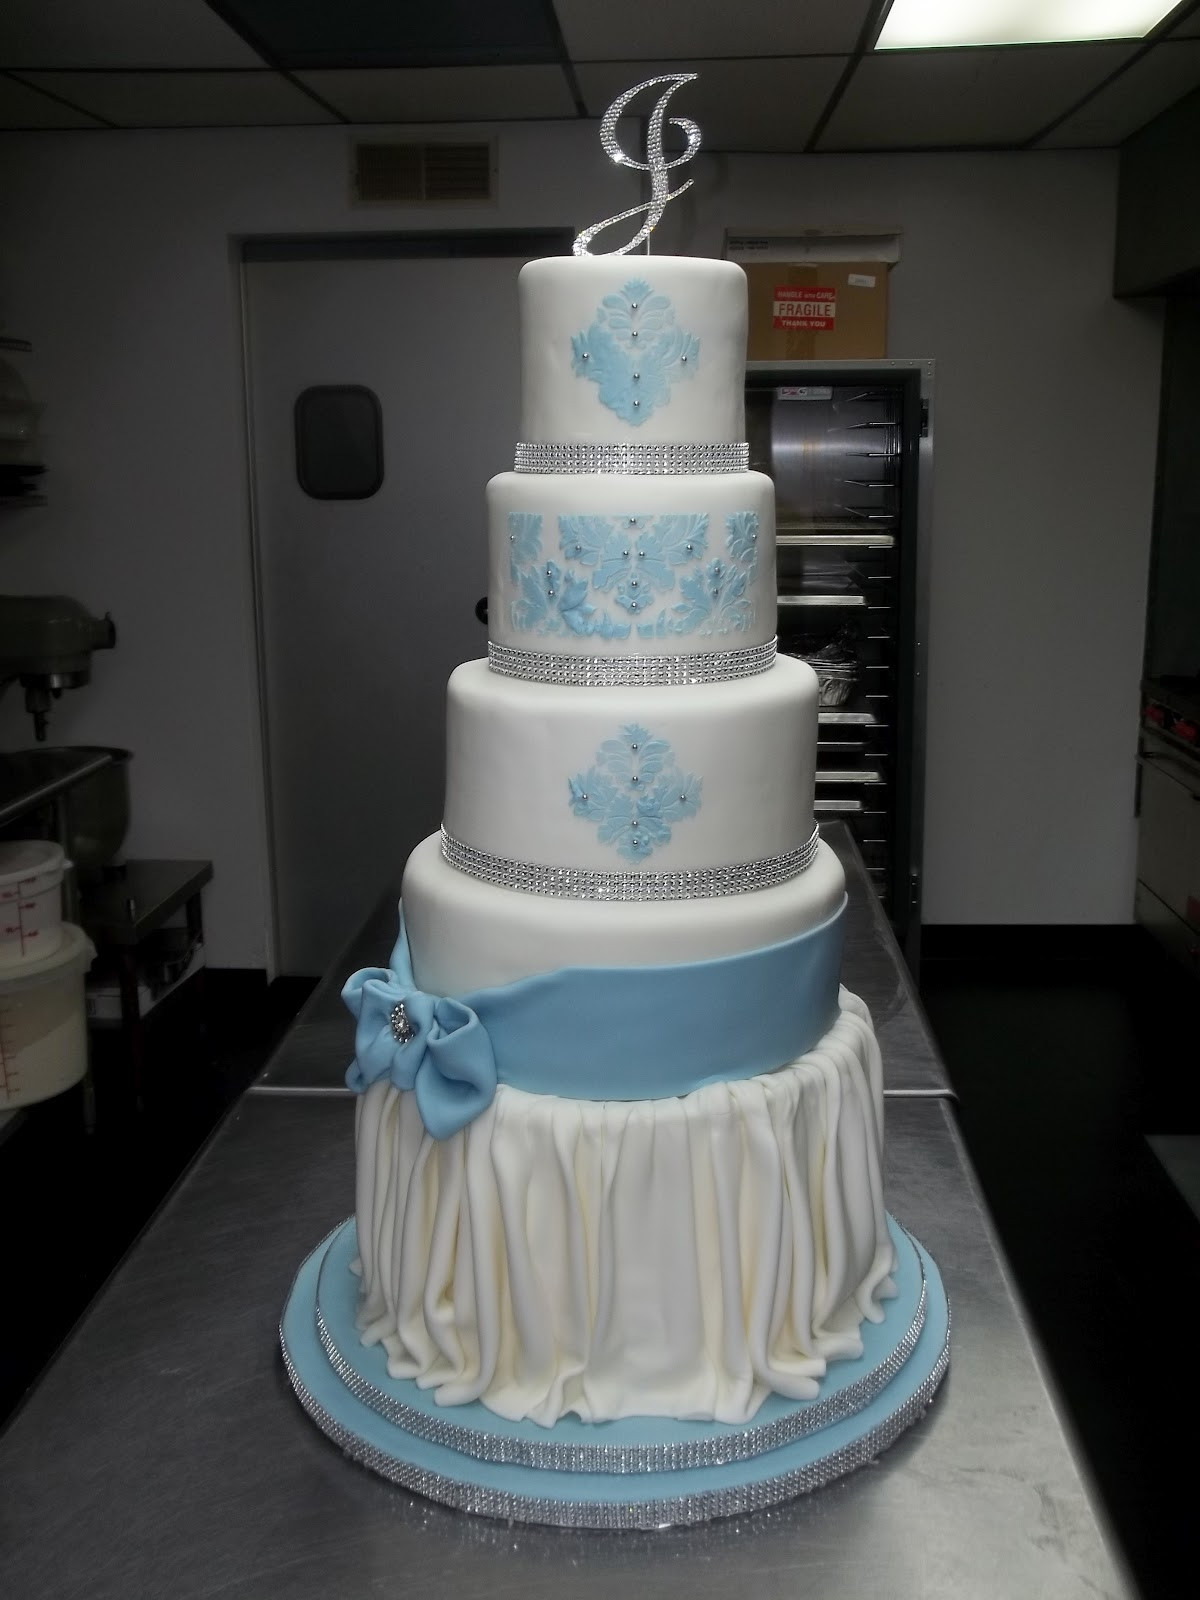 Wedding Cakes St.Louis
 The Sin City Mad Baker Nicole s Wedding Cake in St Louis